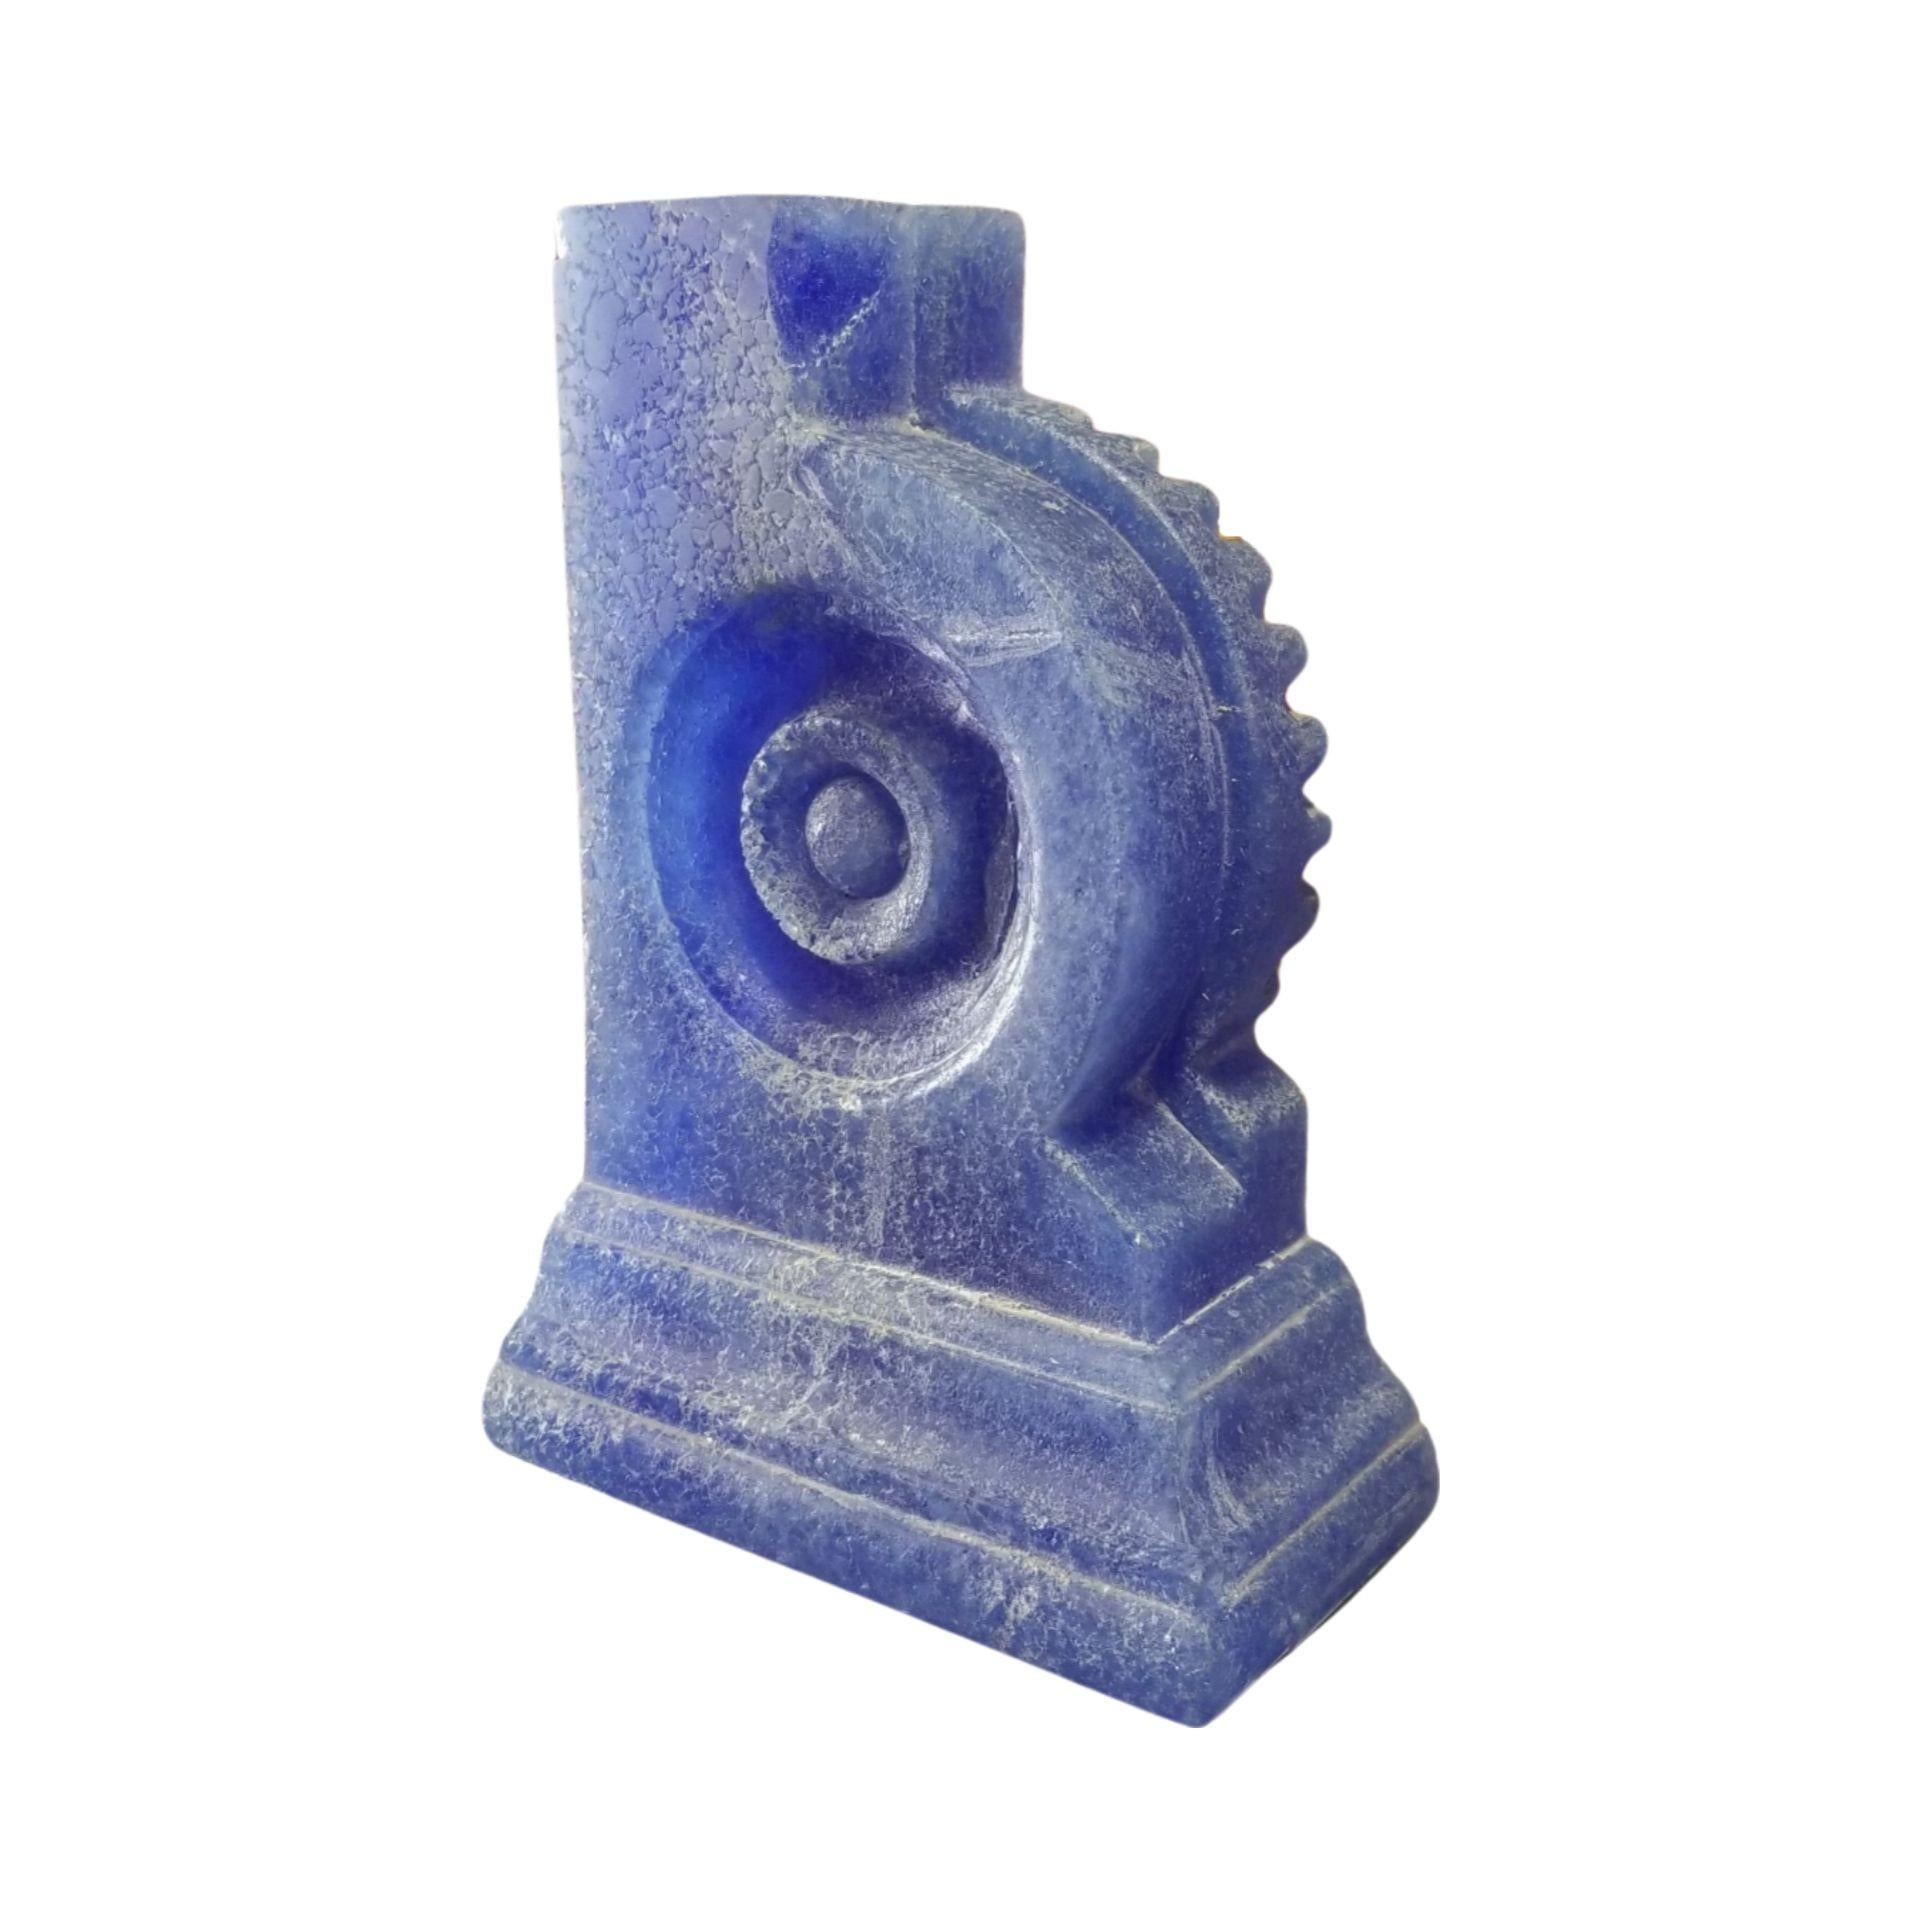 Hand-shaped blue Pâte de Verre glass bookends featuring a modernist abstract form heavily influenced by Mayan patterns carved and wet sanded. 
Echted with the signature R Ricky
Excellent handmade quality. There are some chips as seen in second